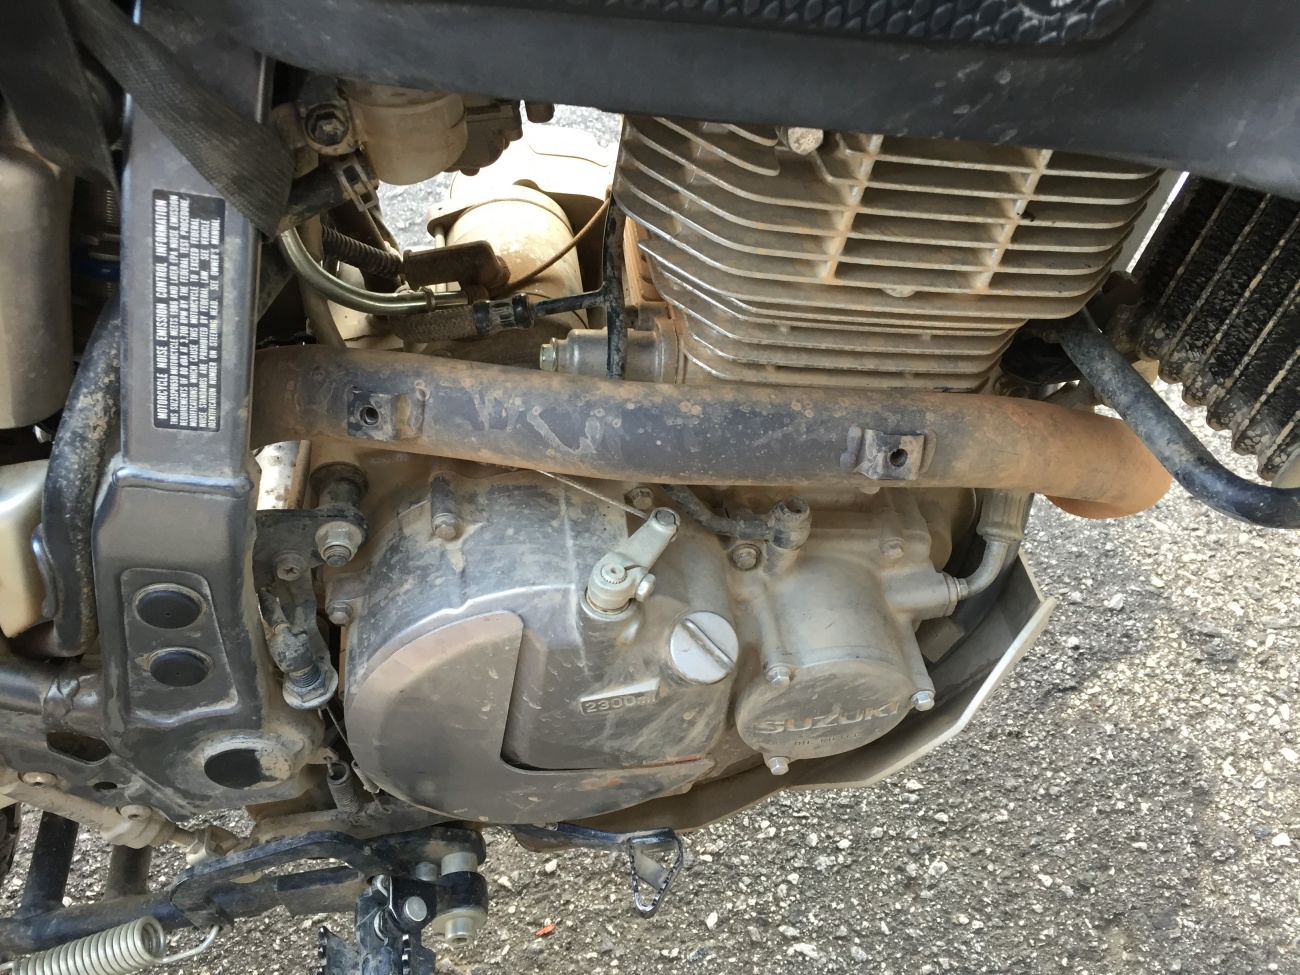 Exhaust Shield Missing